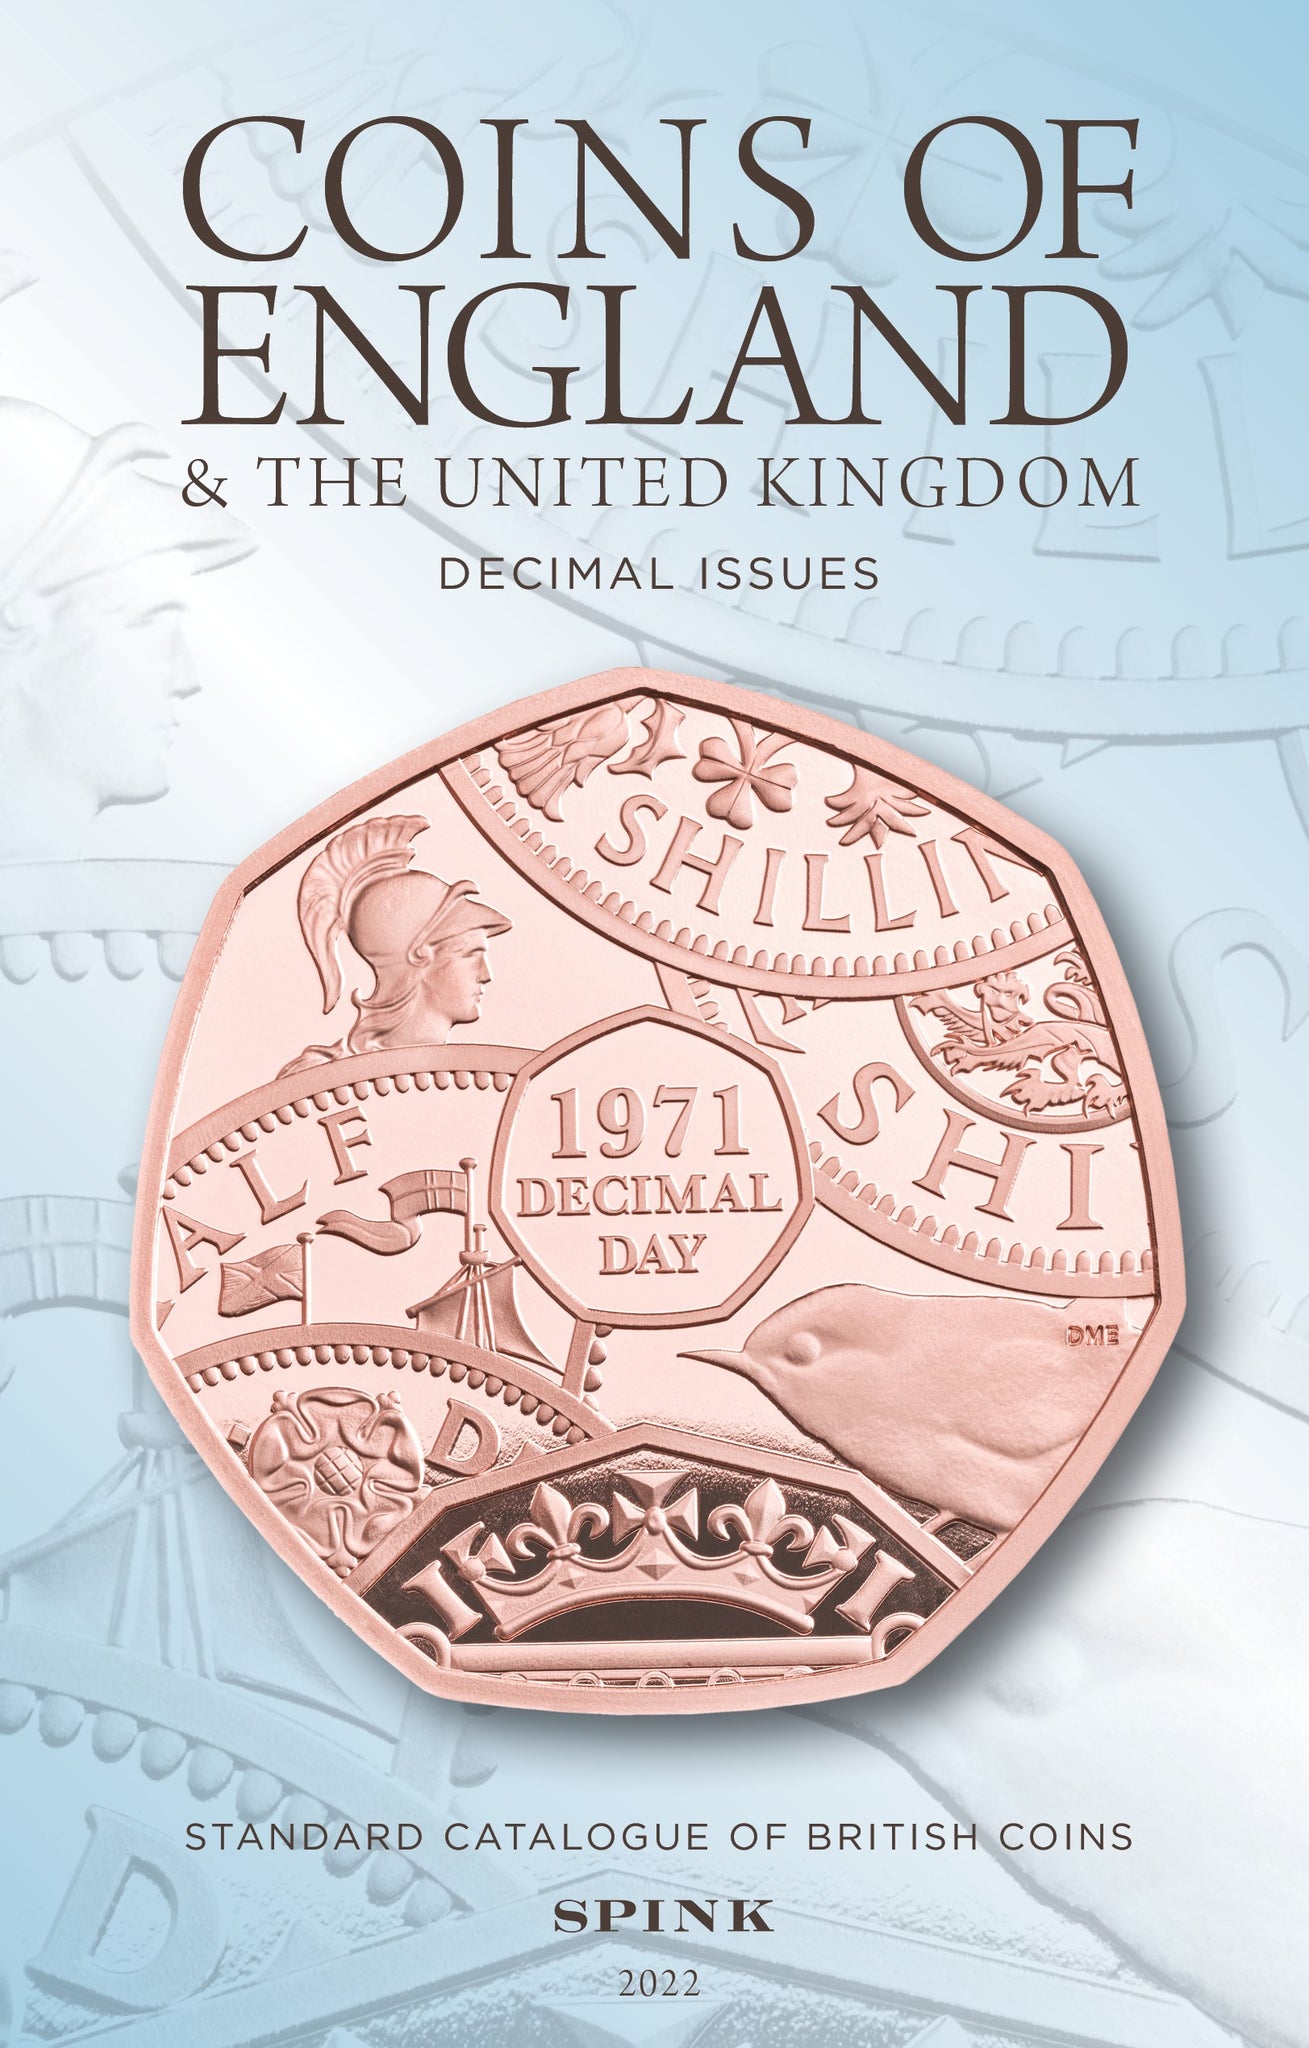 Coins of England and the United Kingdom 2022 Decimal Issues (downloadable PDF)